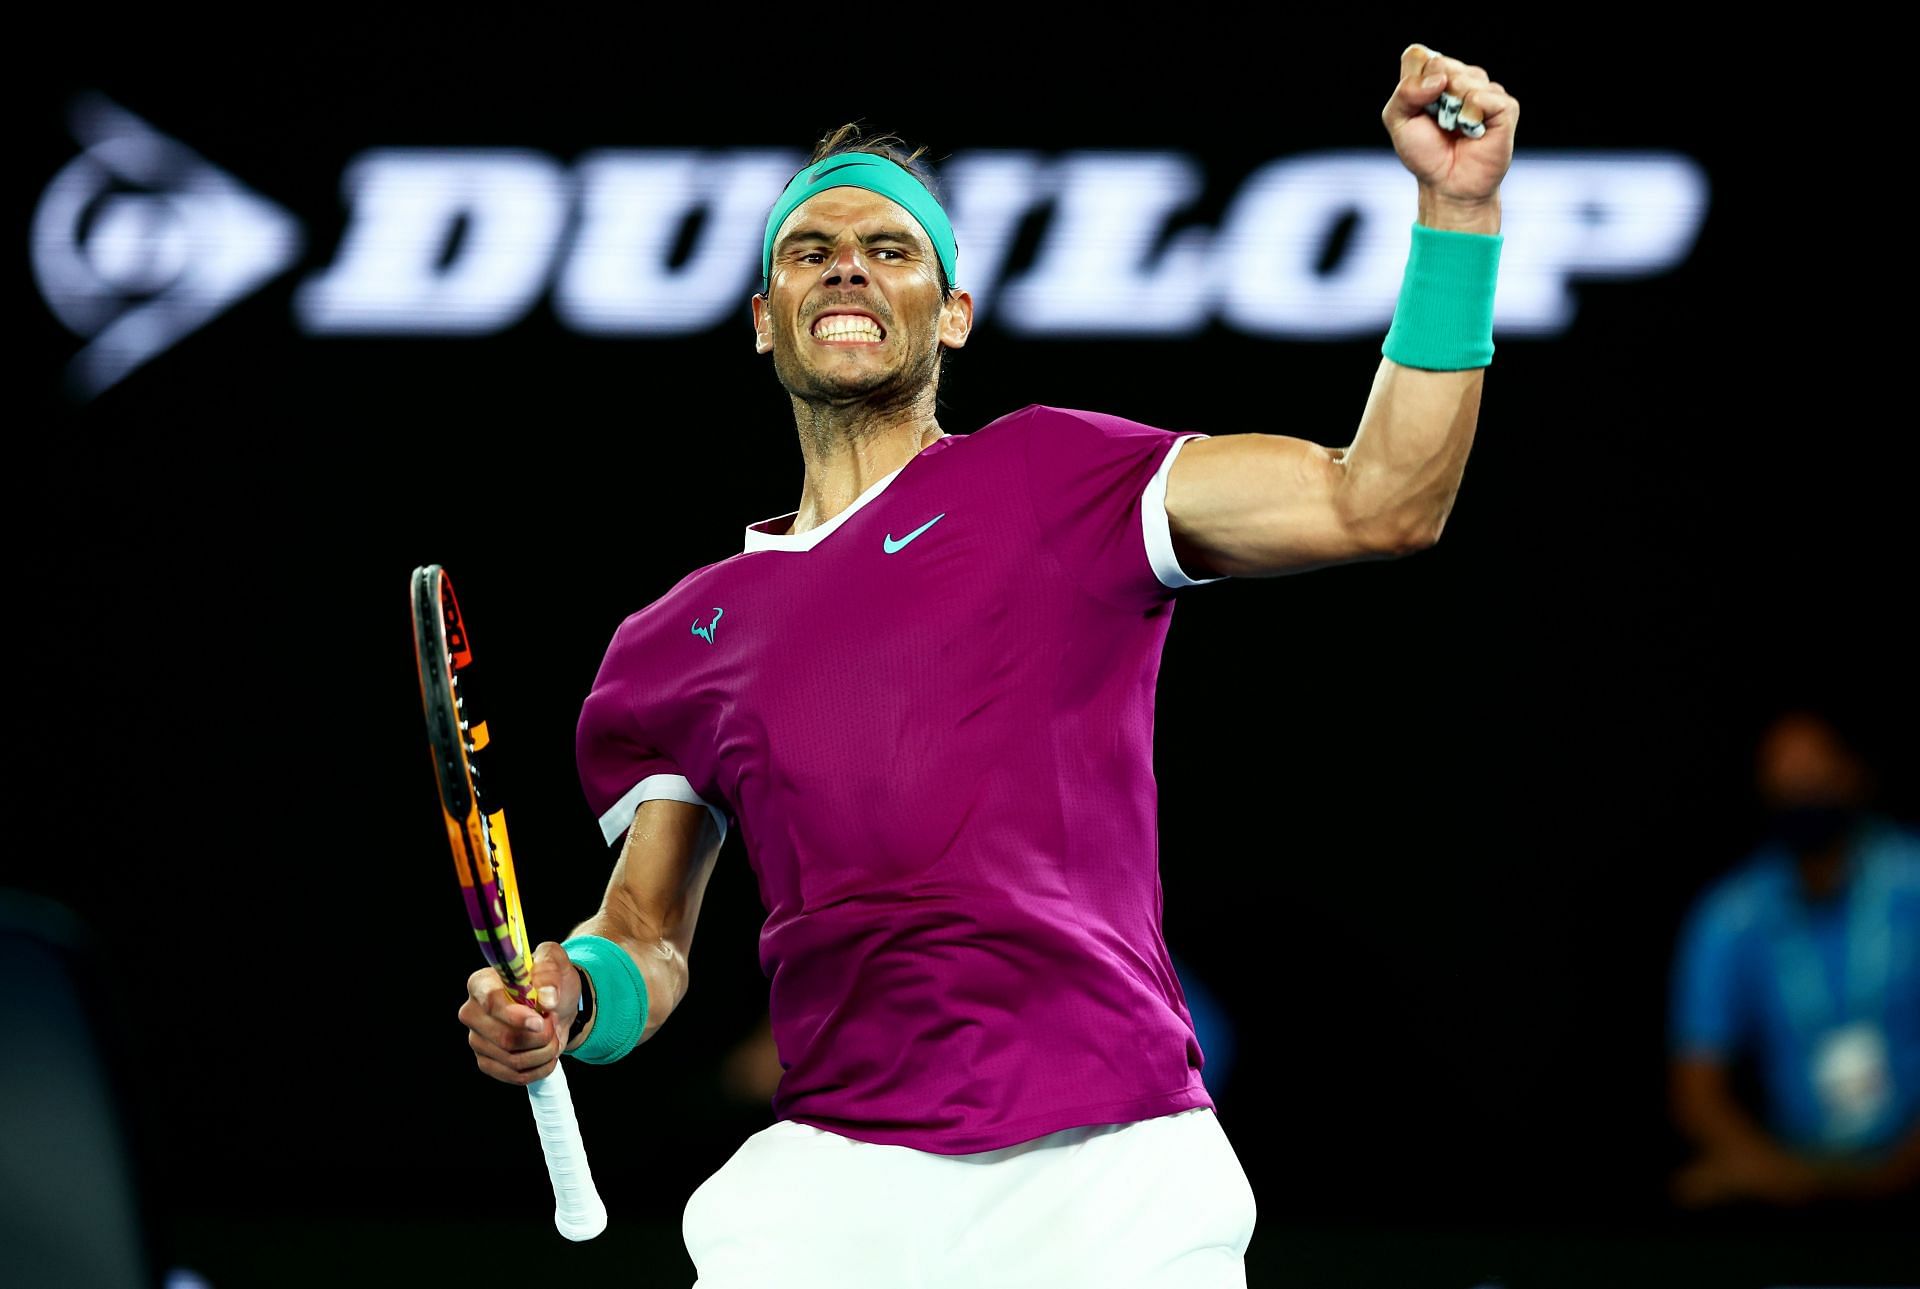 Rafael Nadal said he doubted whether he could return to action